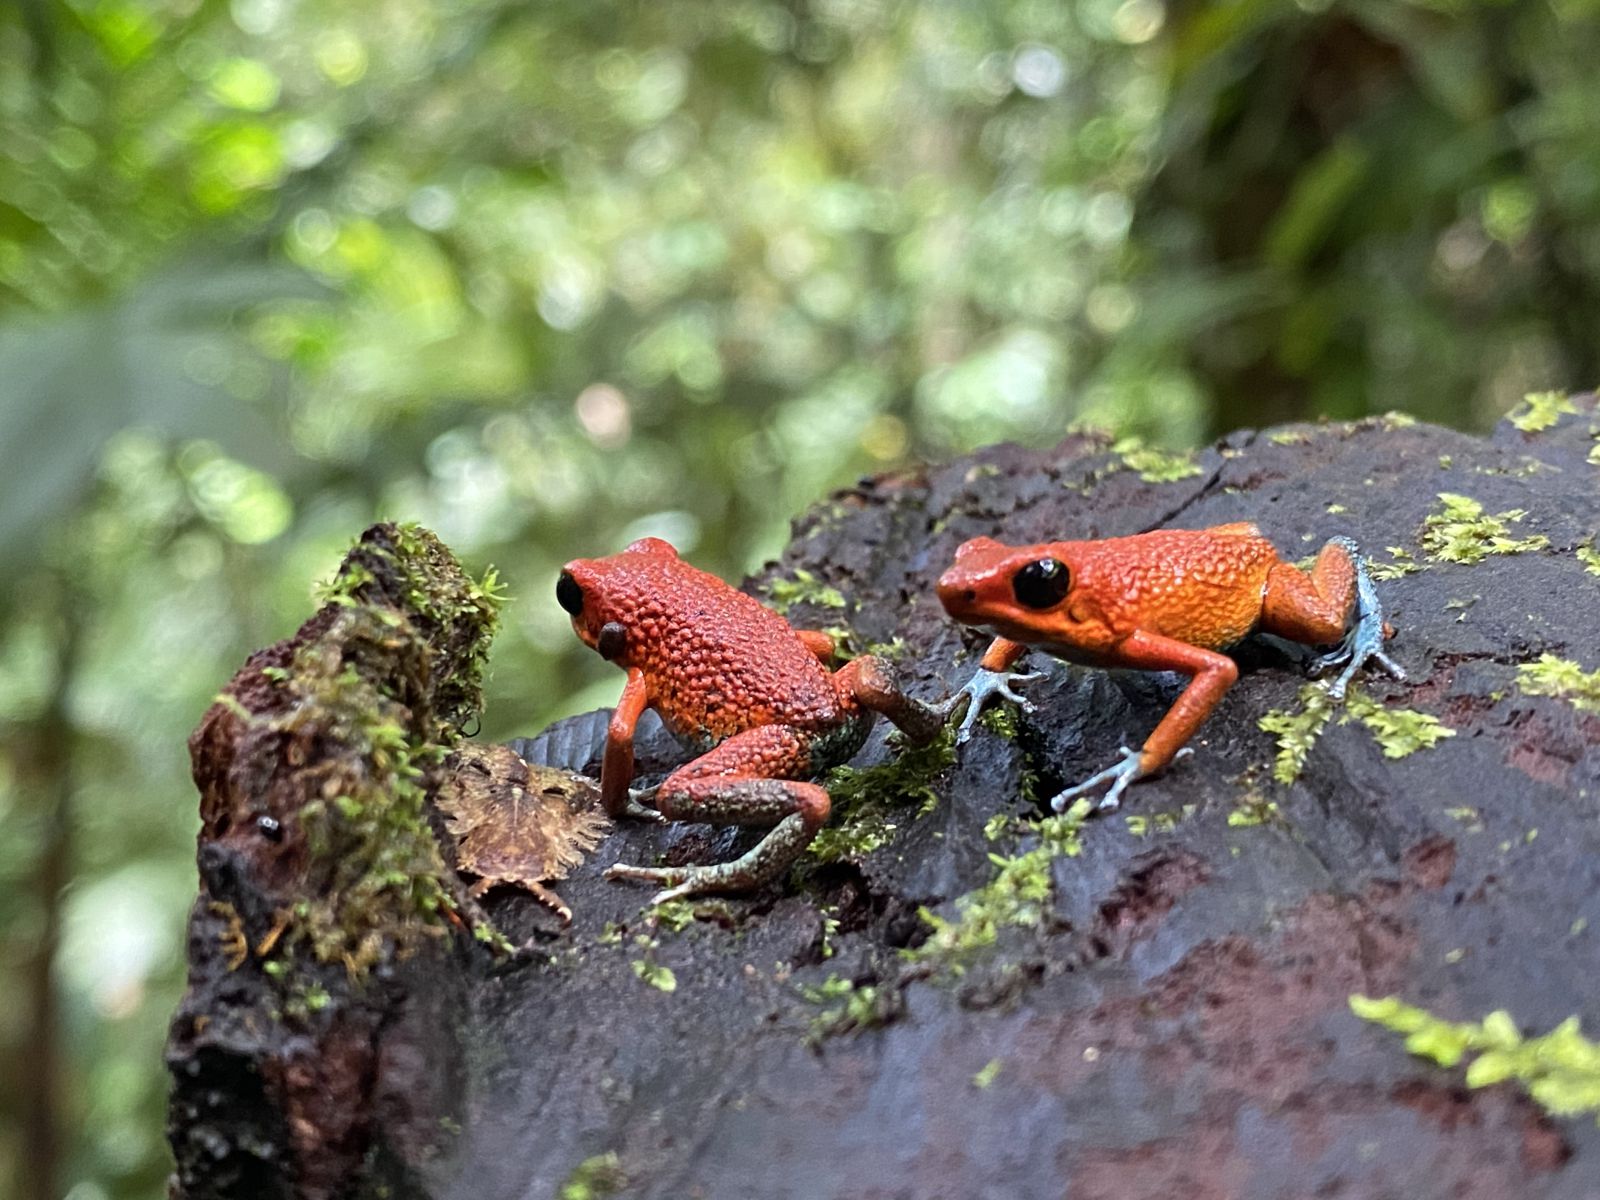 Two Granular Poison Frogs / Oophaga granulifera over a tronk,Hacienda Ébano, a Nature Reserve and Farm with Rainforest and Waterfalls